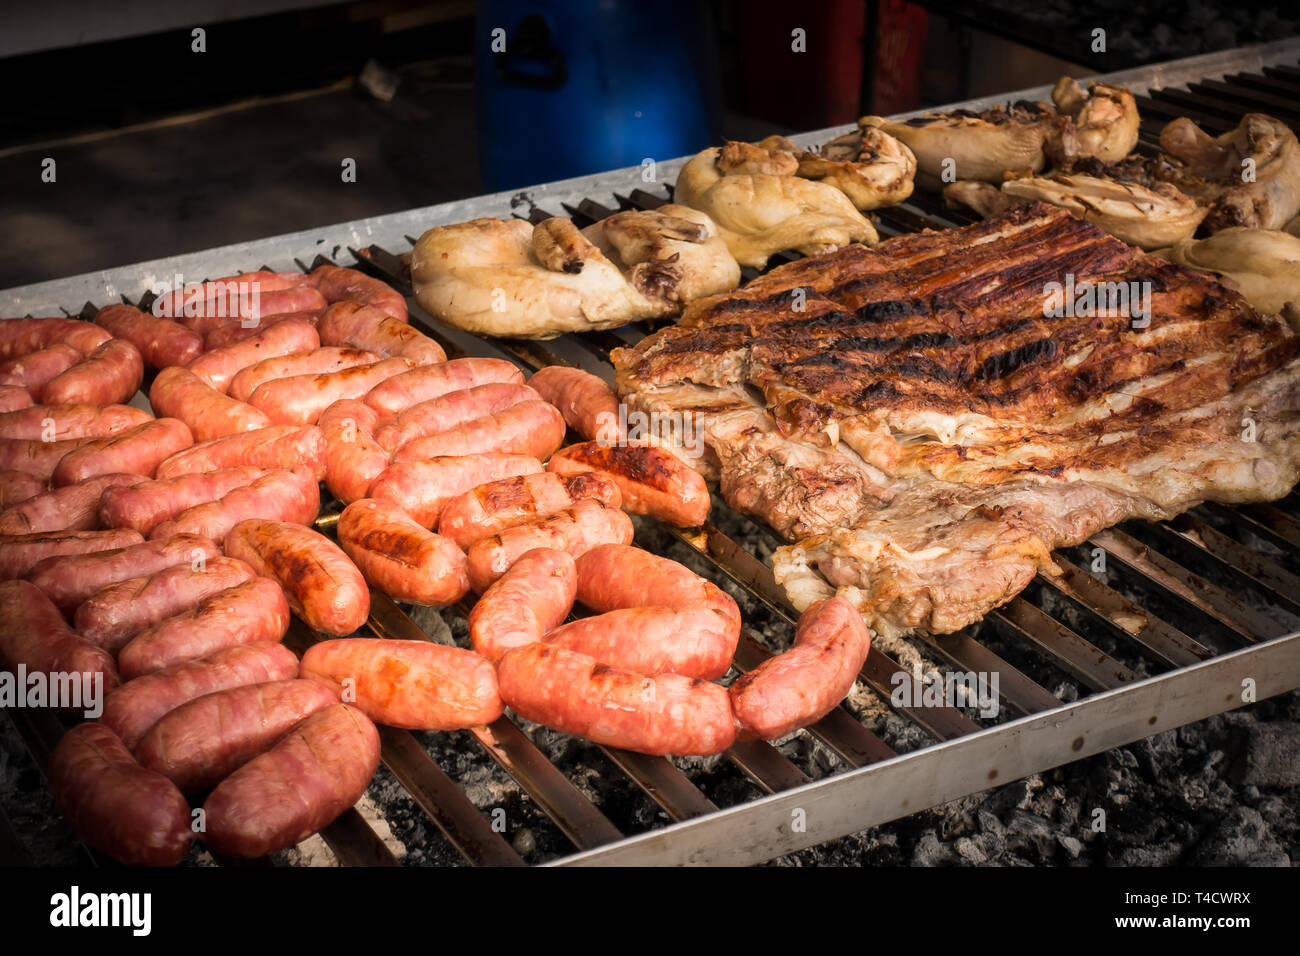 Meat baked on the grill. Sausages homemade sausages on the grill. Street food. Festival of street food and meat Stock Photo